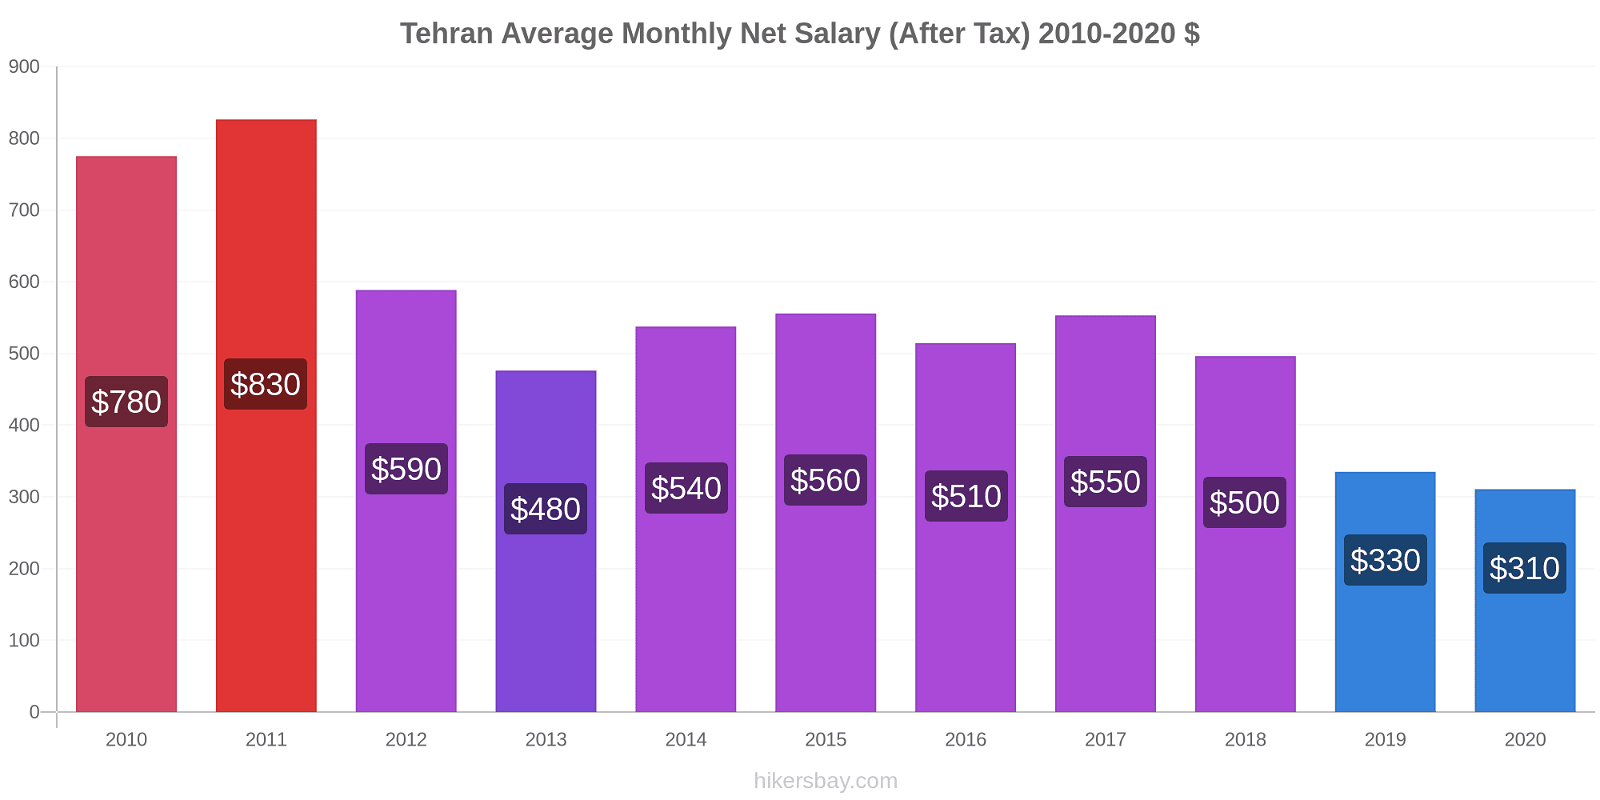 Tehran price changes Average Monthly Net Salary (After Tax) hikersbay.com